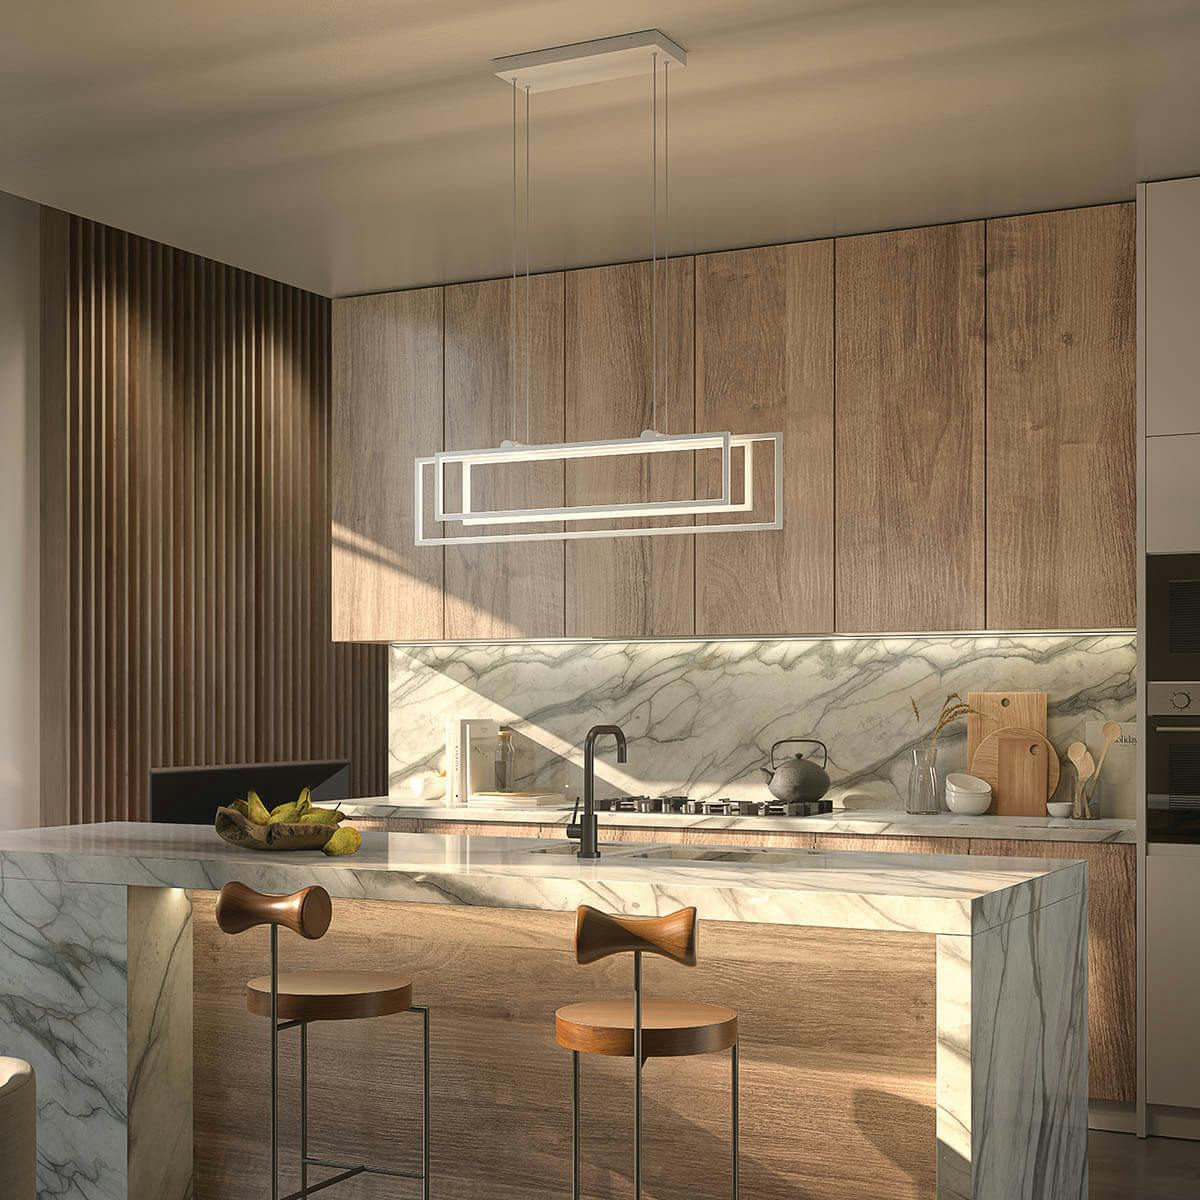 Day time kitchen with Jestin 38" LED Linear Pendant White